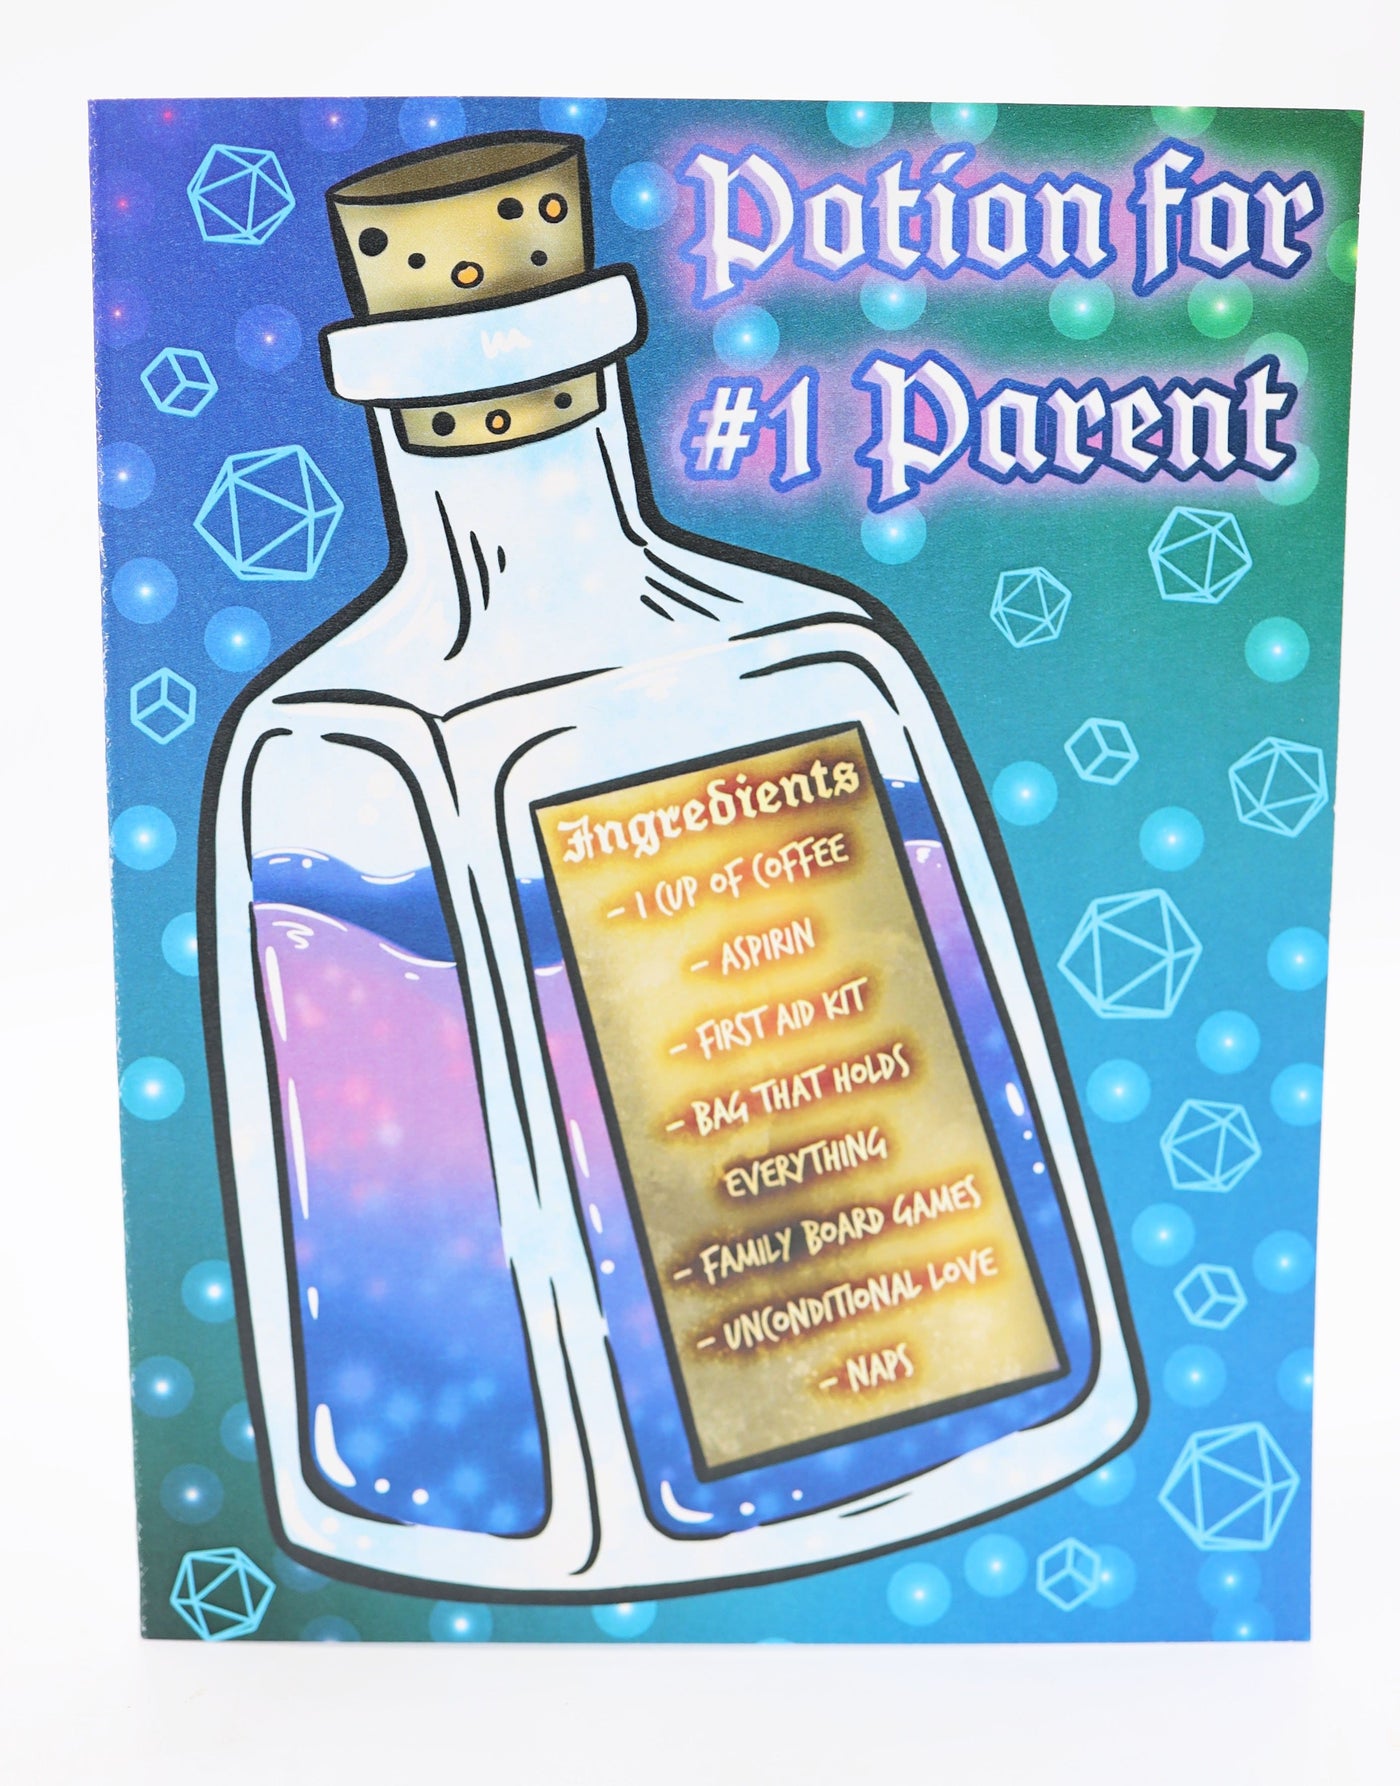 Parents Day Card - Potion Greeting Card Foam Brain Games